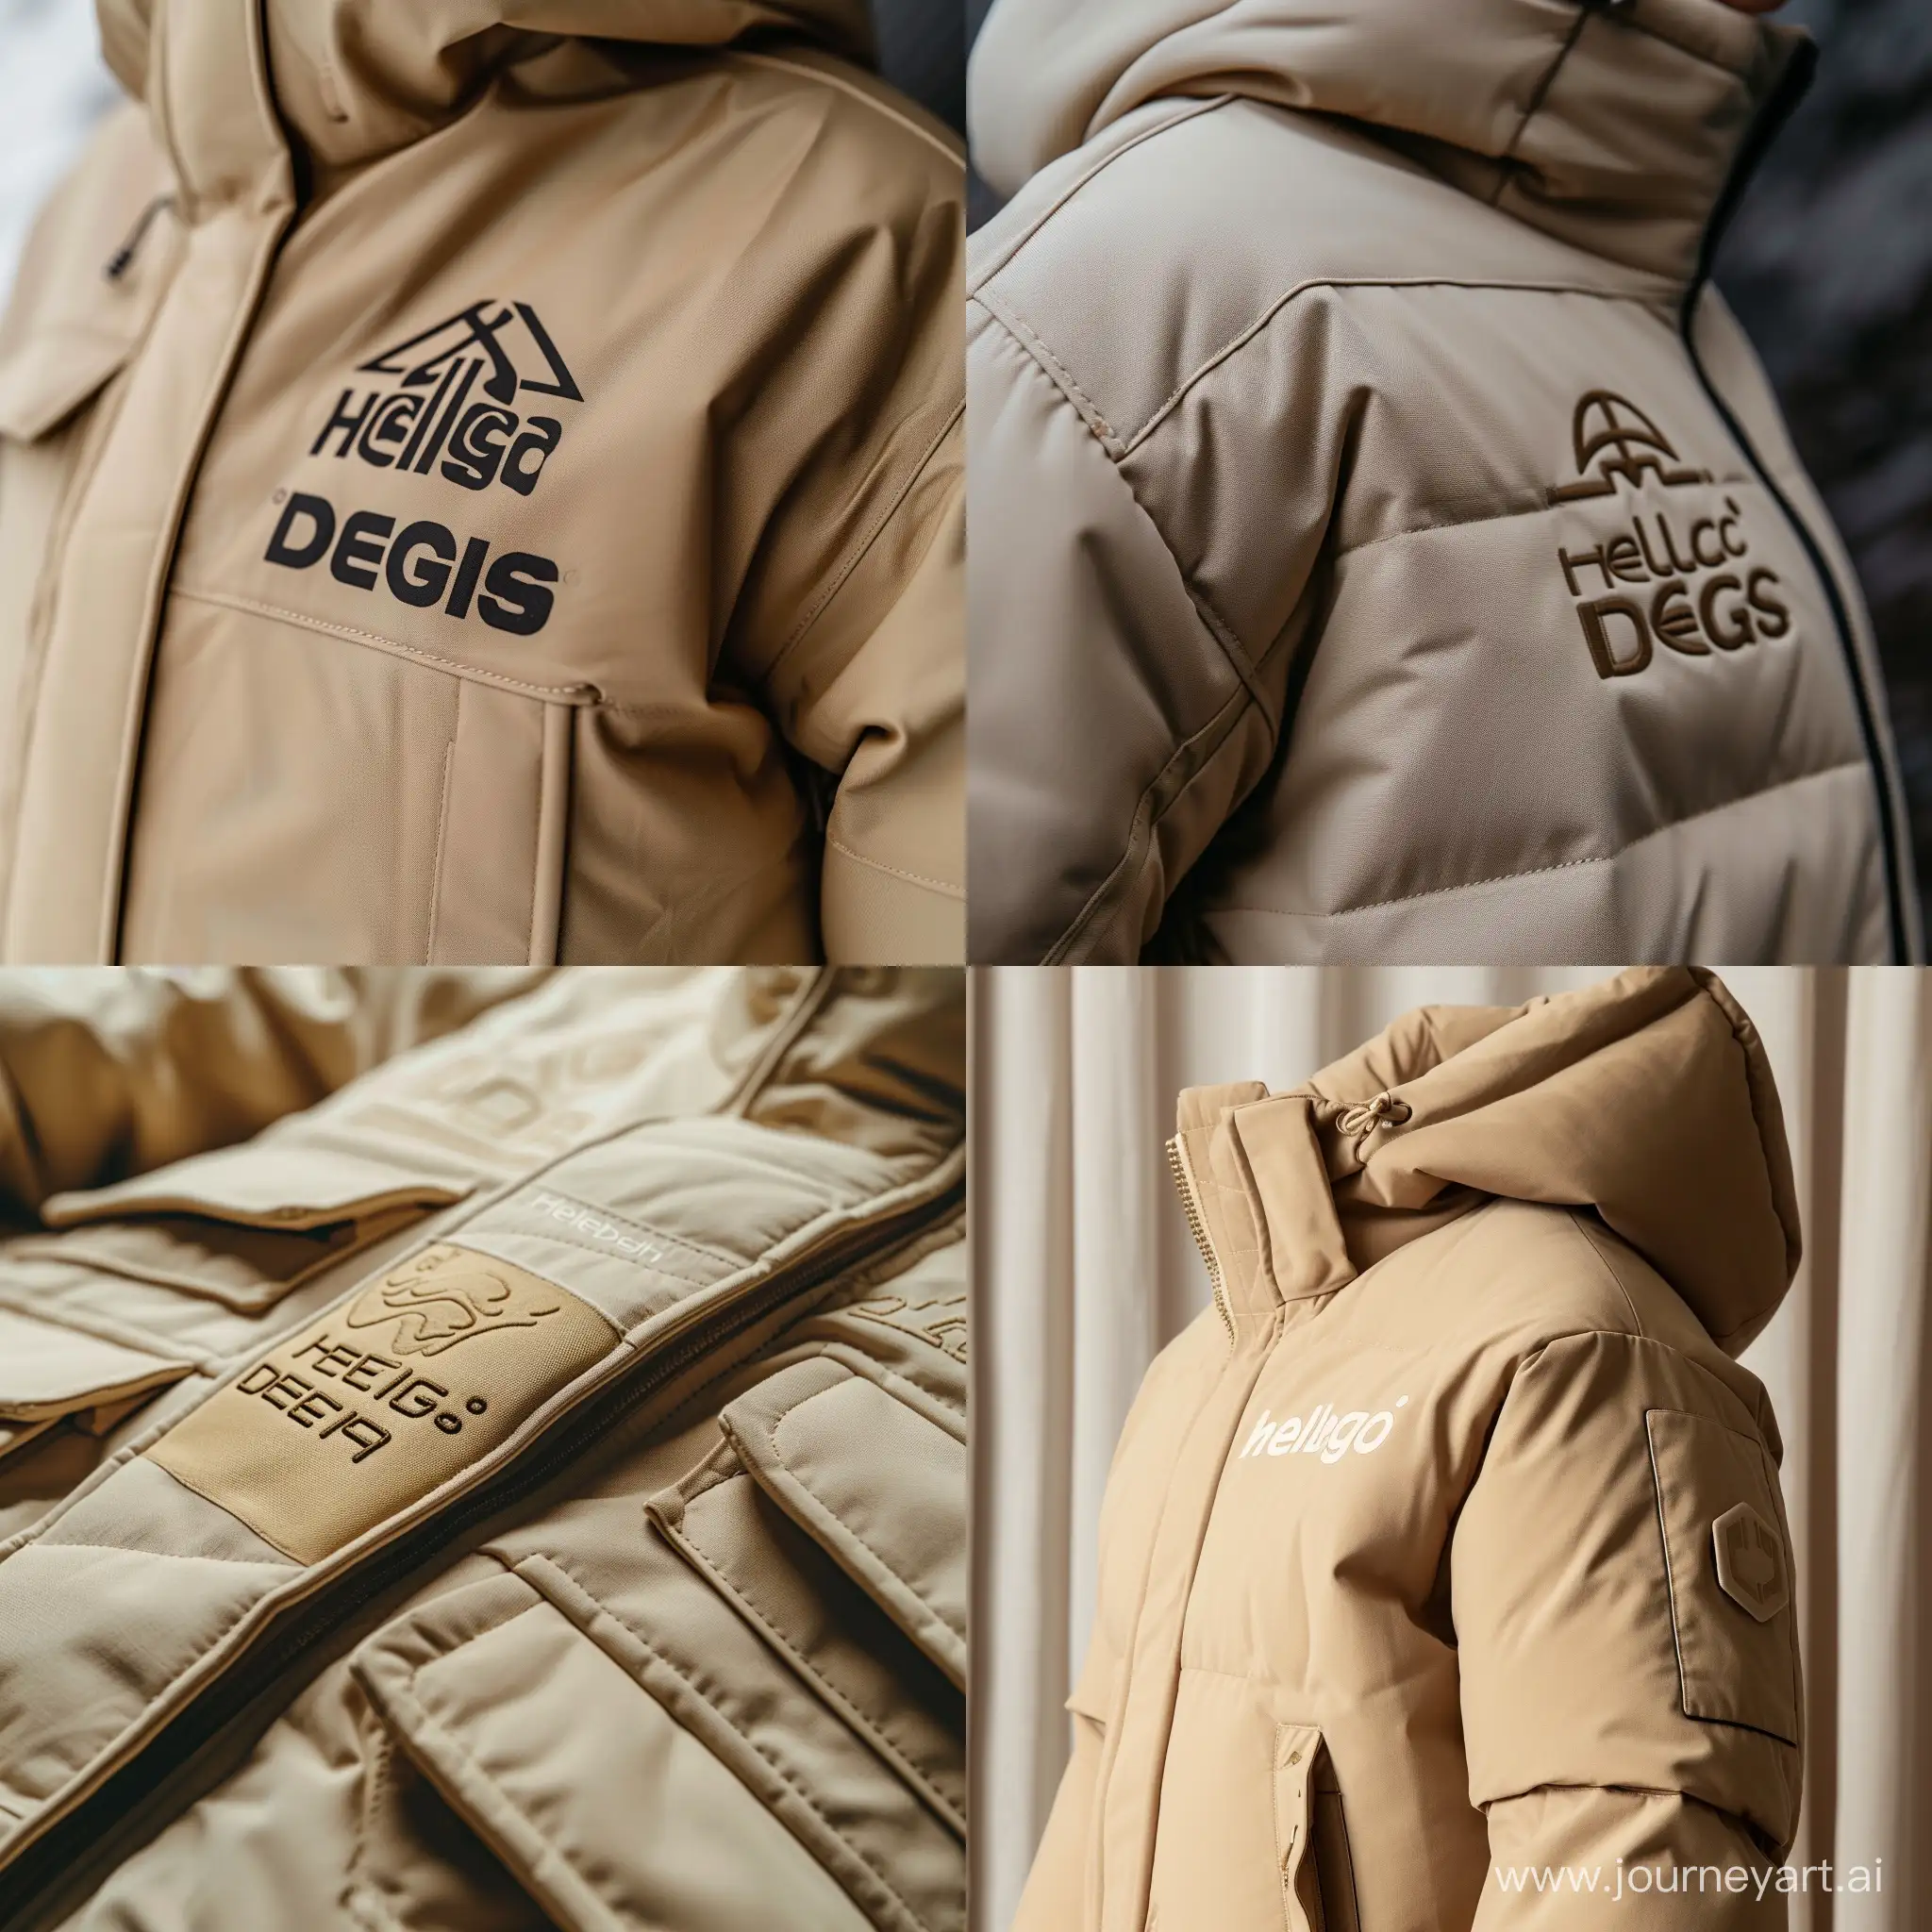 Make a beige winter jacket with a logo that says "Helgø Design"